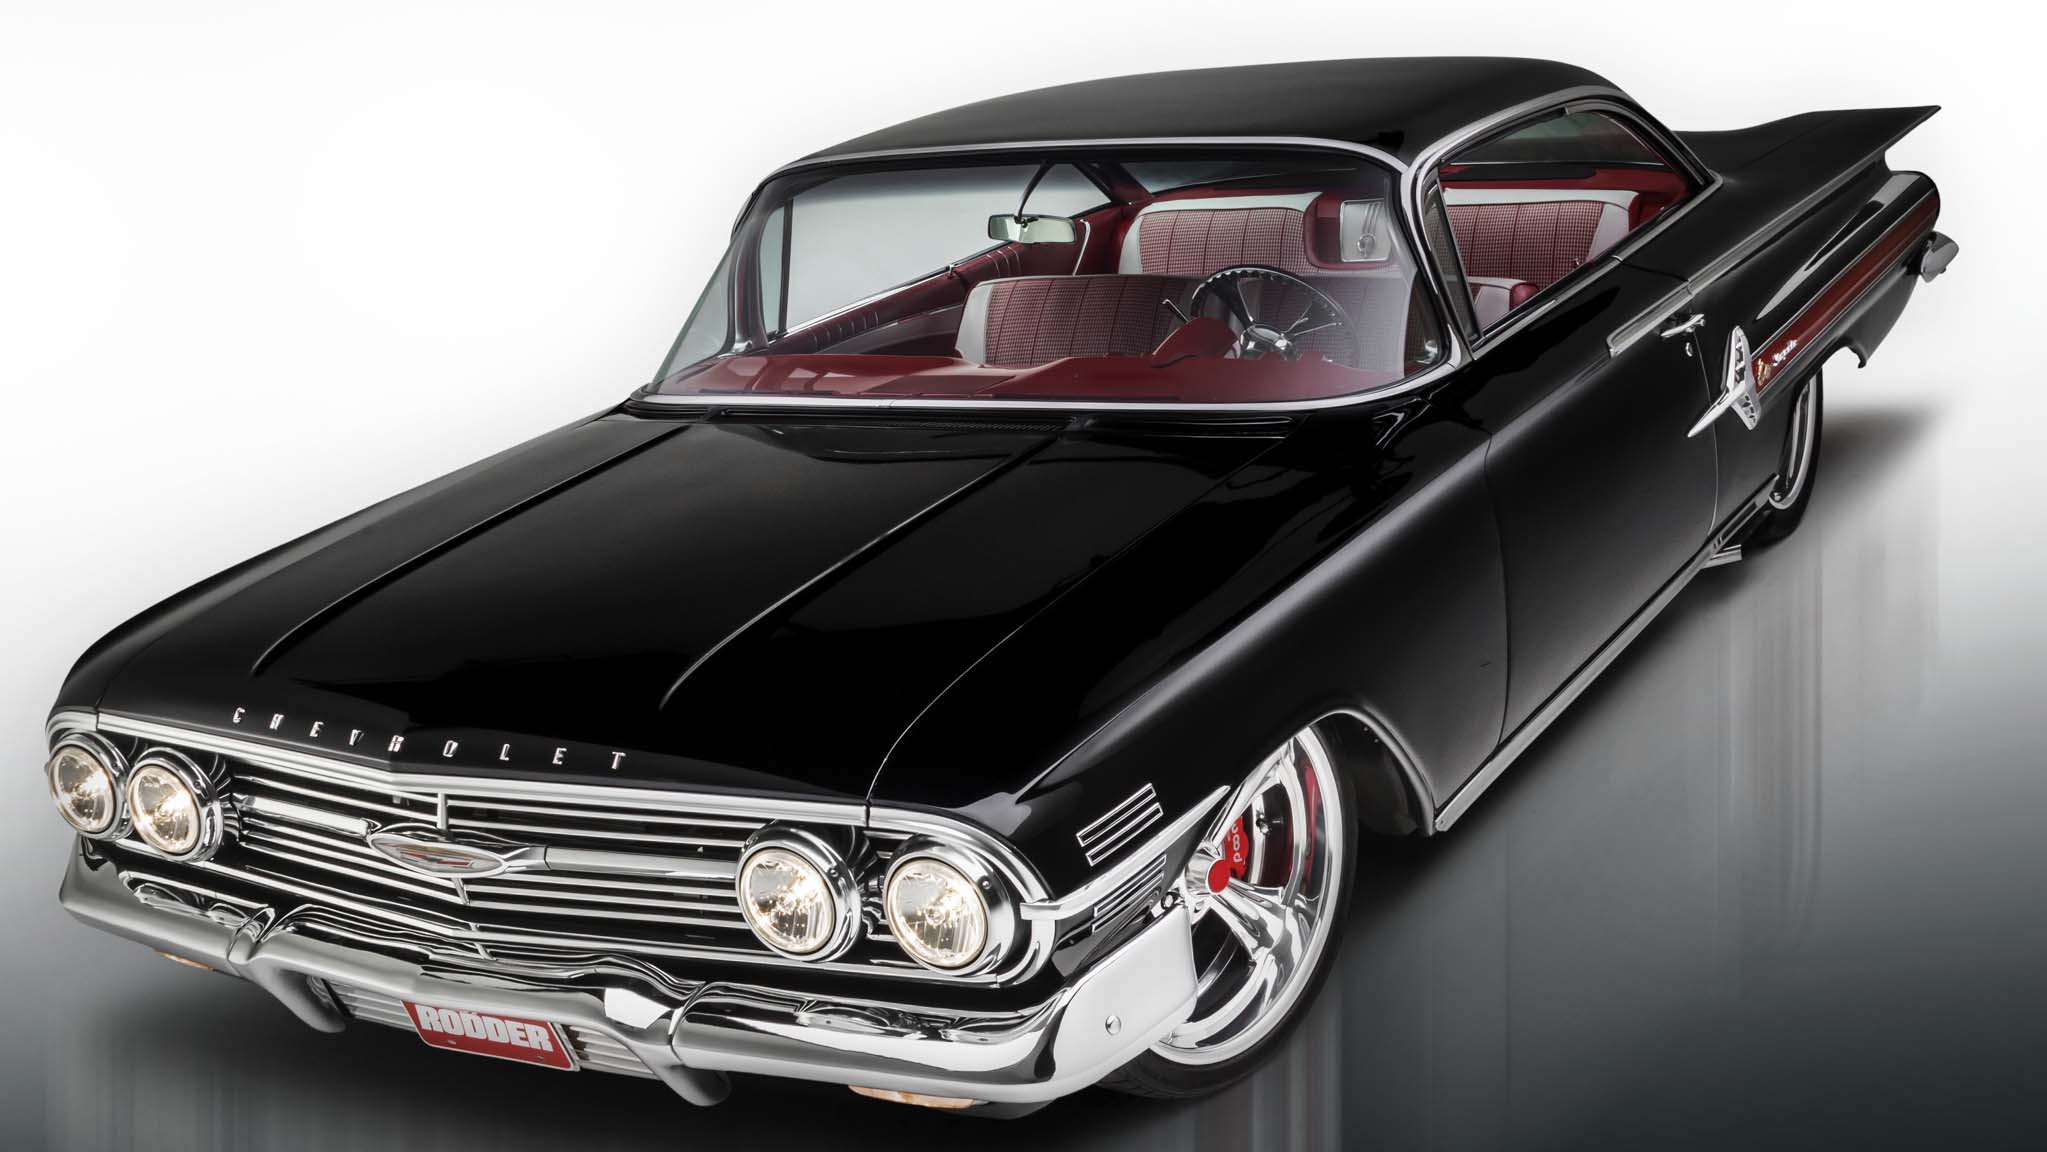 A 1960 Chevy Impala With a Pavement-Scraping Stance and Restomod Style